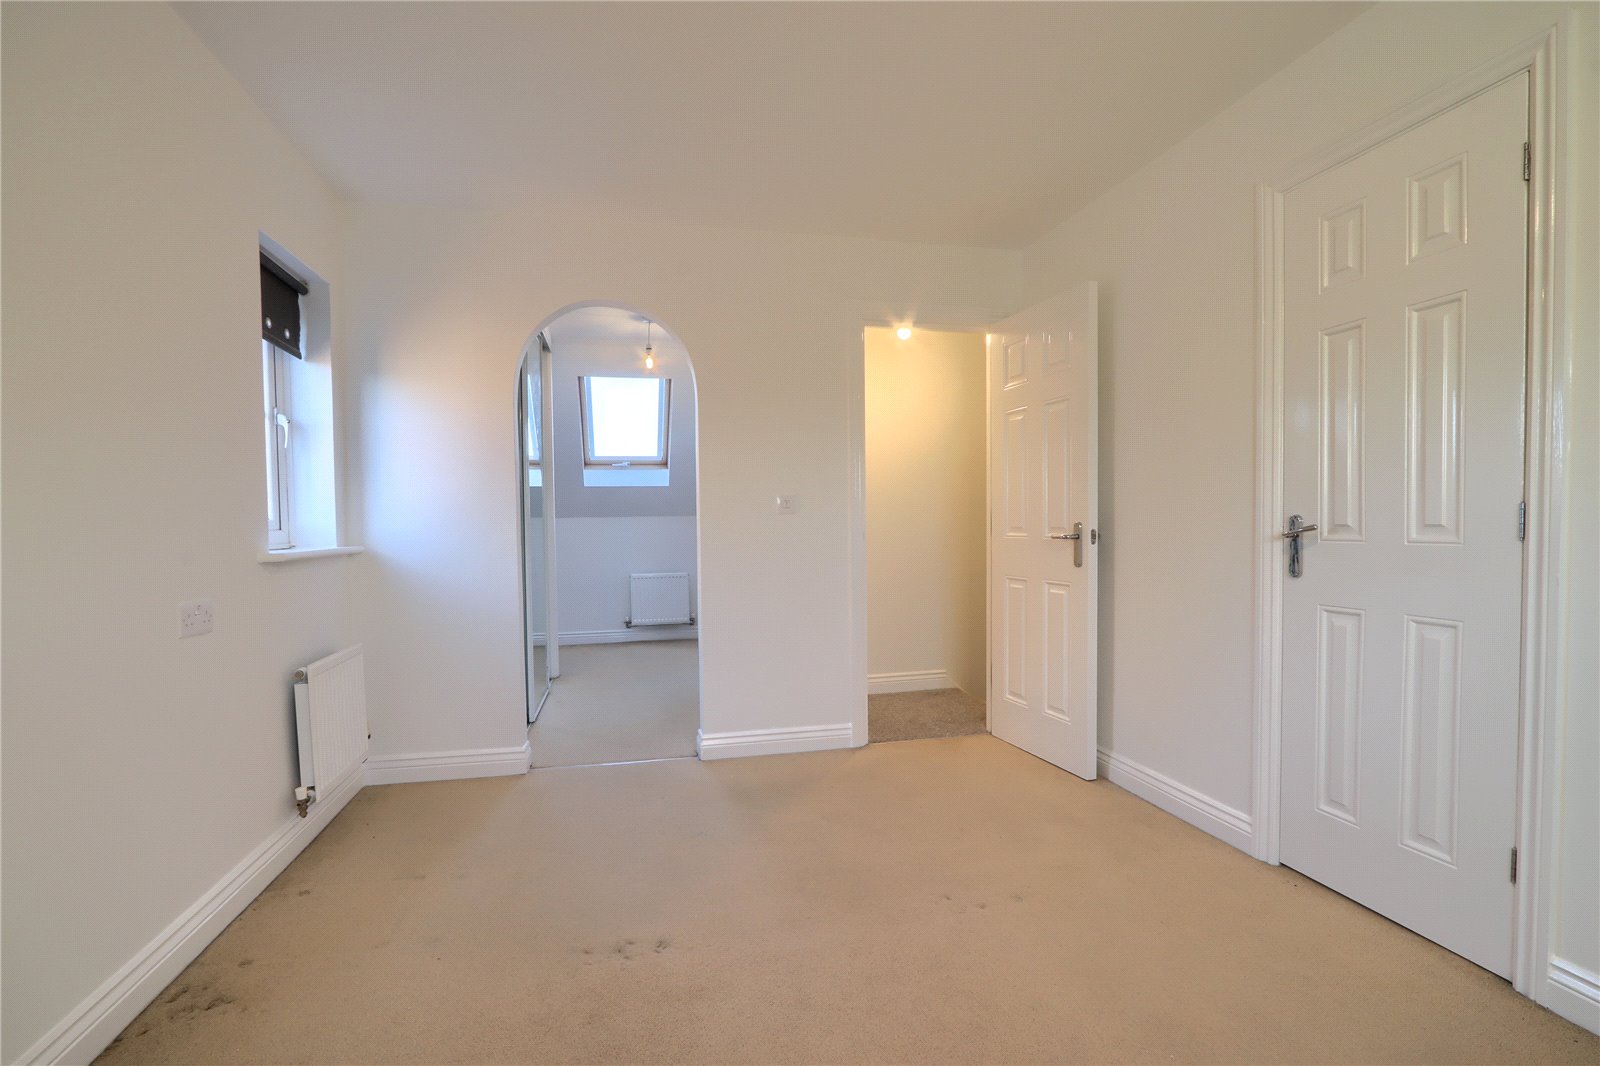 3 bed house for sale in Pennyroyal Road, Stockton-on-Tees  - Property Image 6